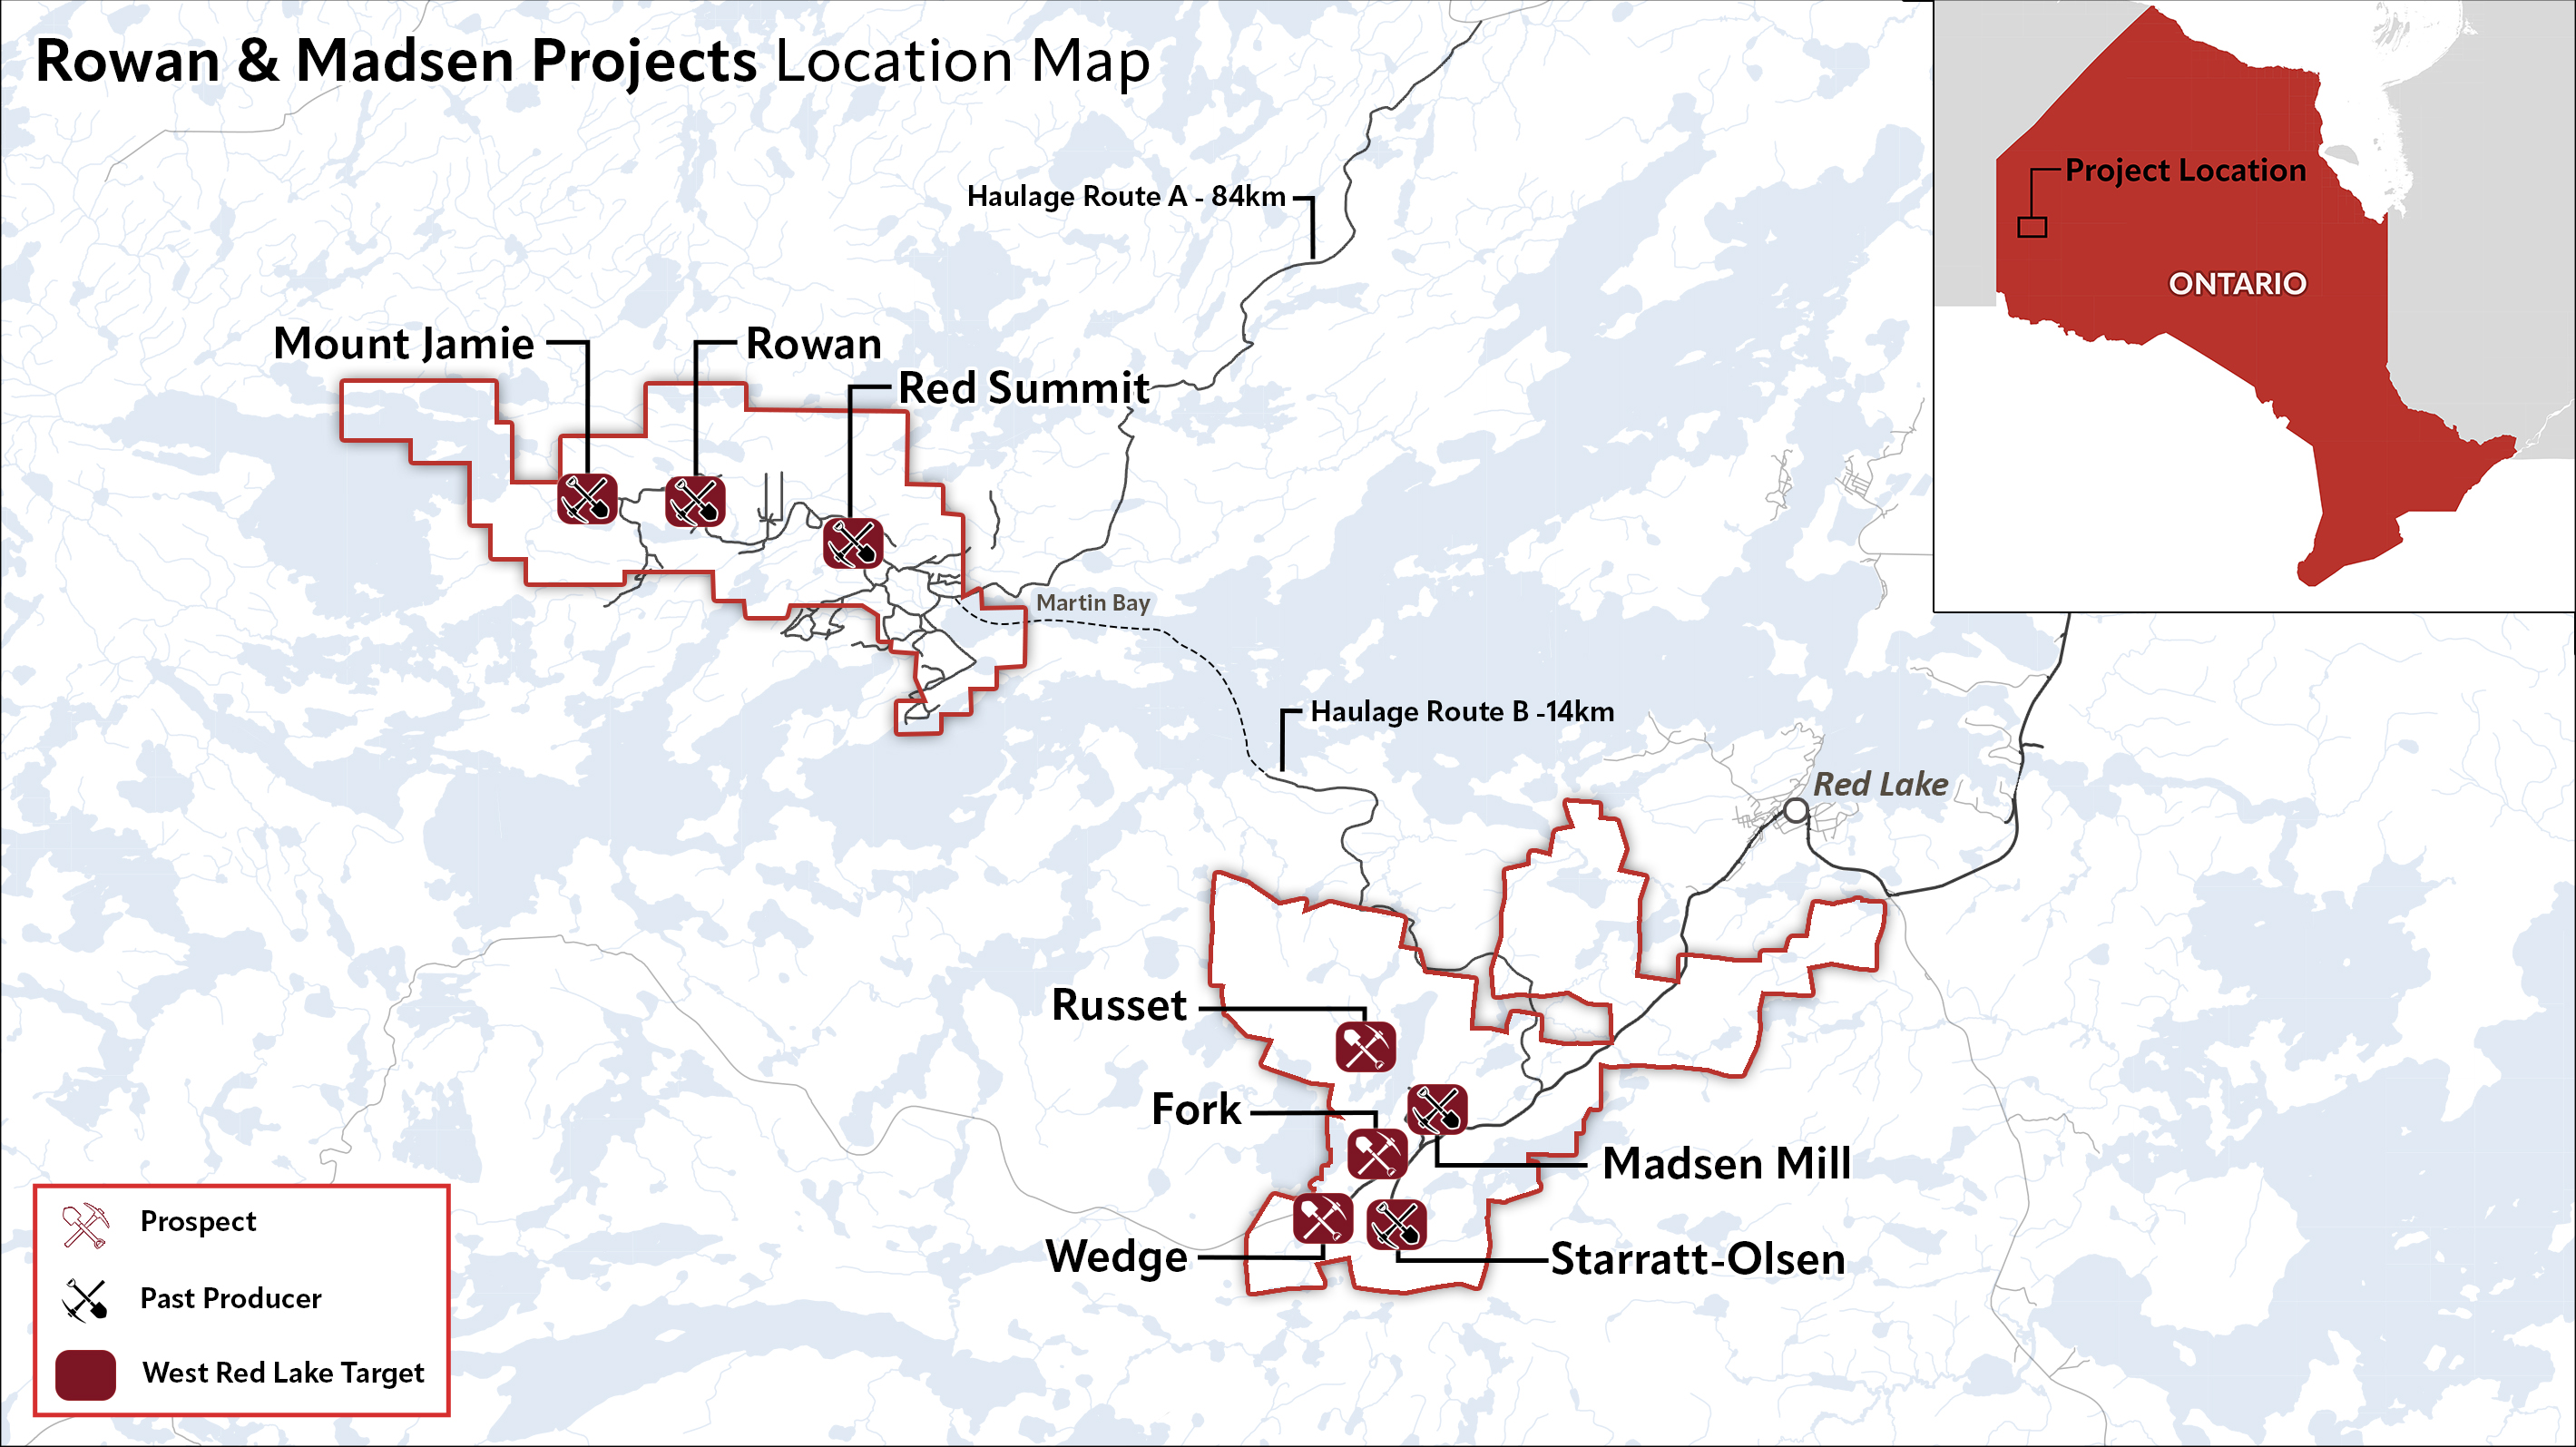 2023-10-11-NR_WRLG_Rowan_and_Madsen_Projects_Location_Map